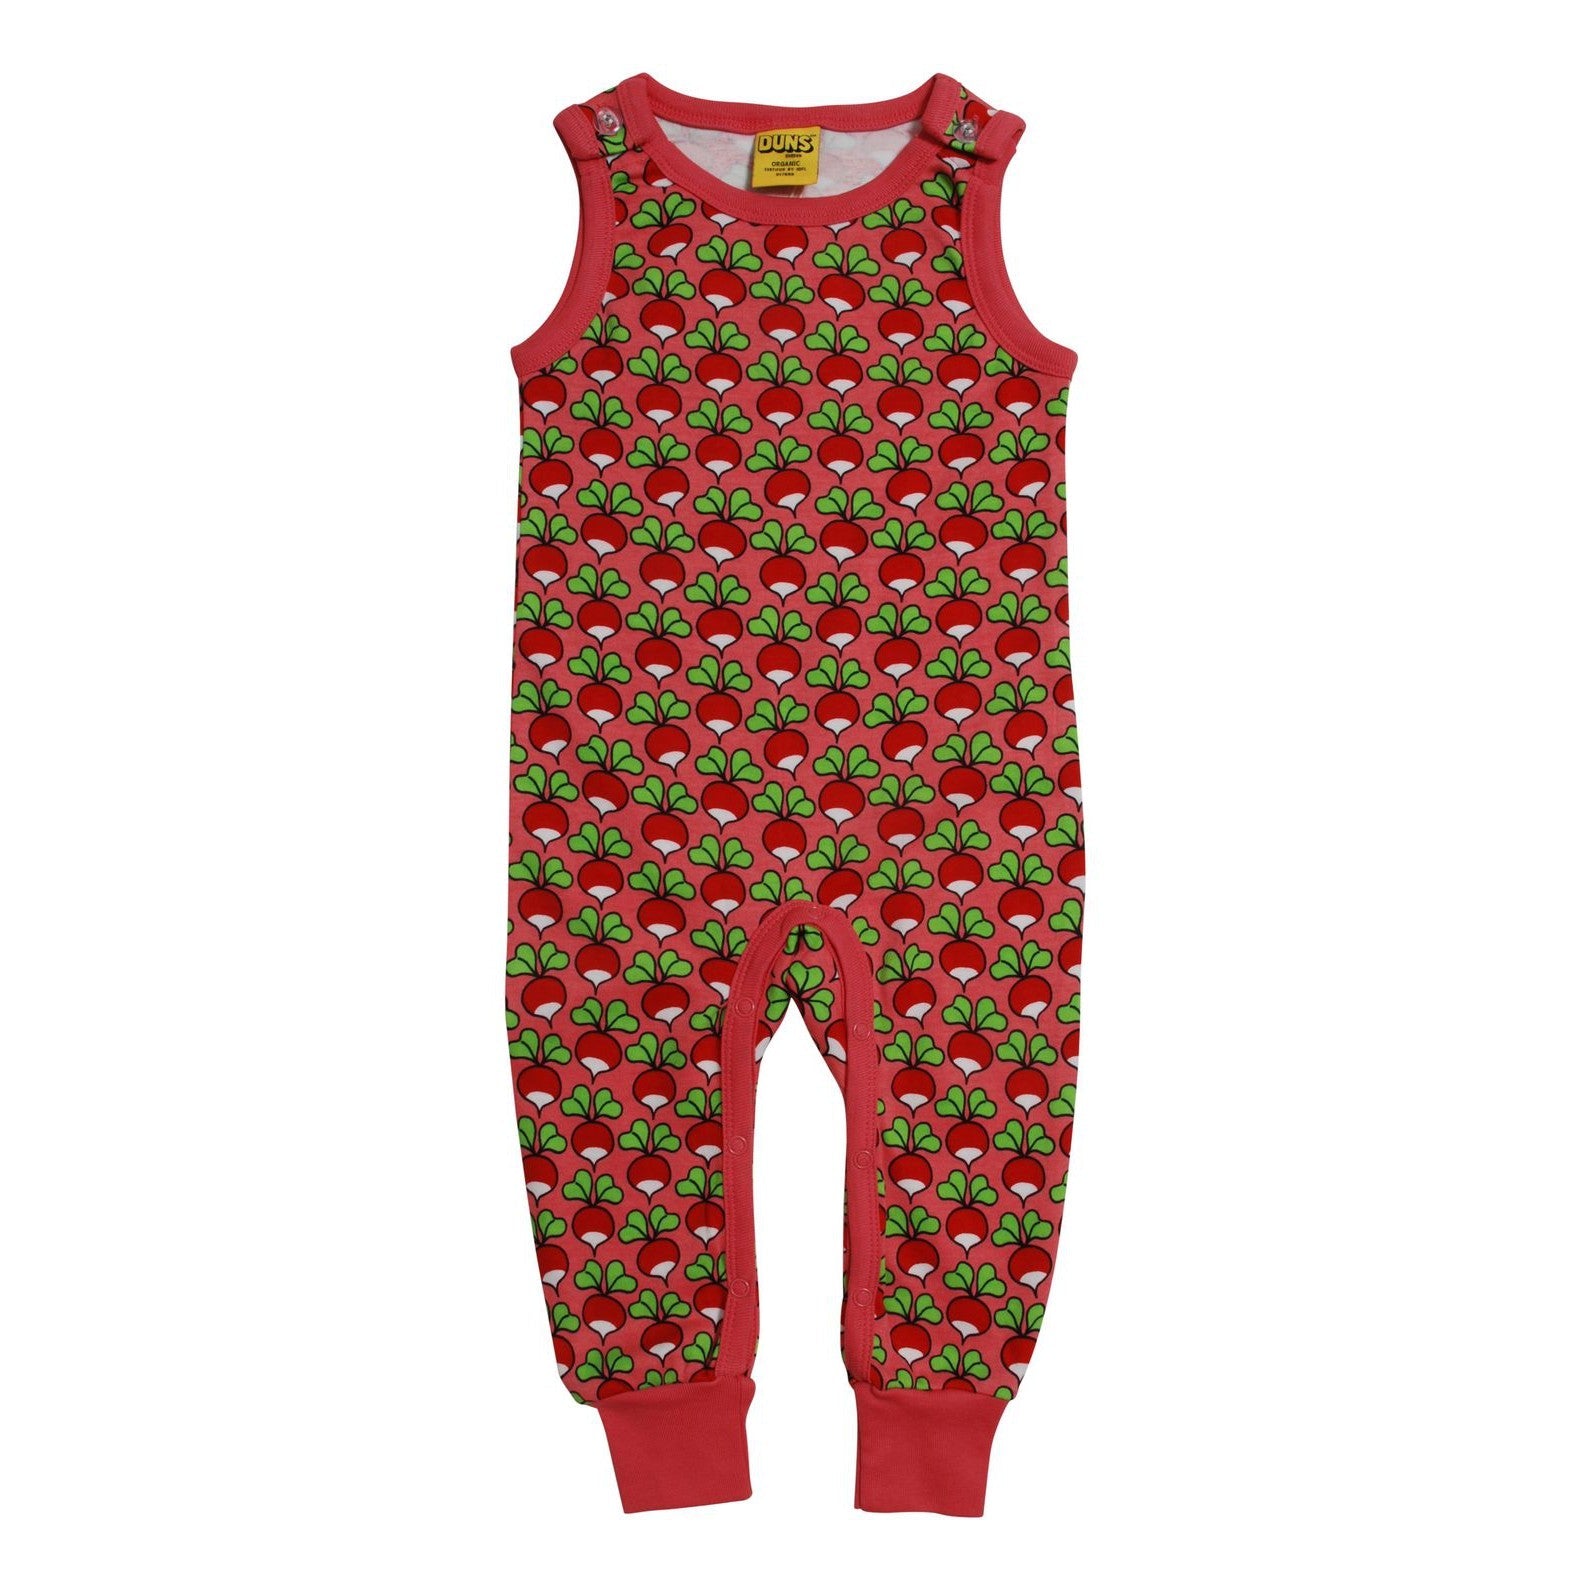 Radish - Strawberry Pink Dungarees - 2 Left Size 2-4 months & 3-4 years-Duns Sweden-Modern Rascals